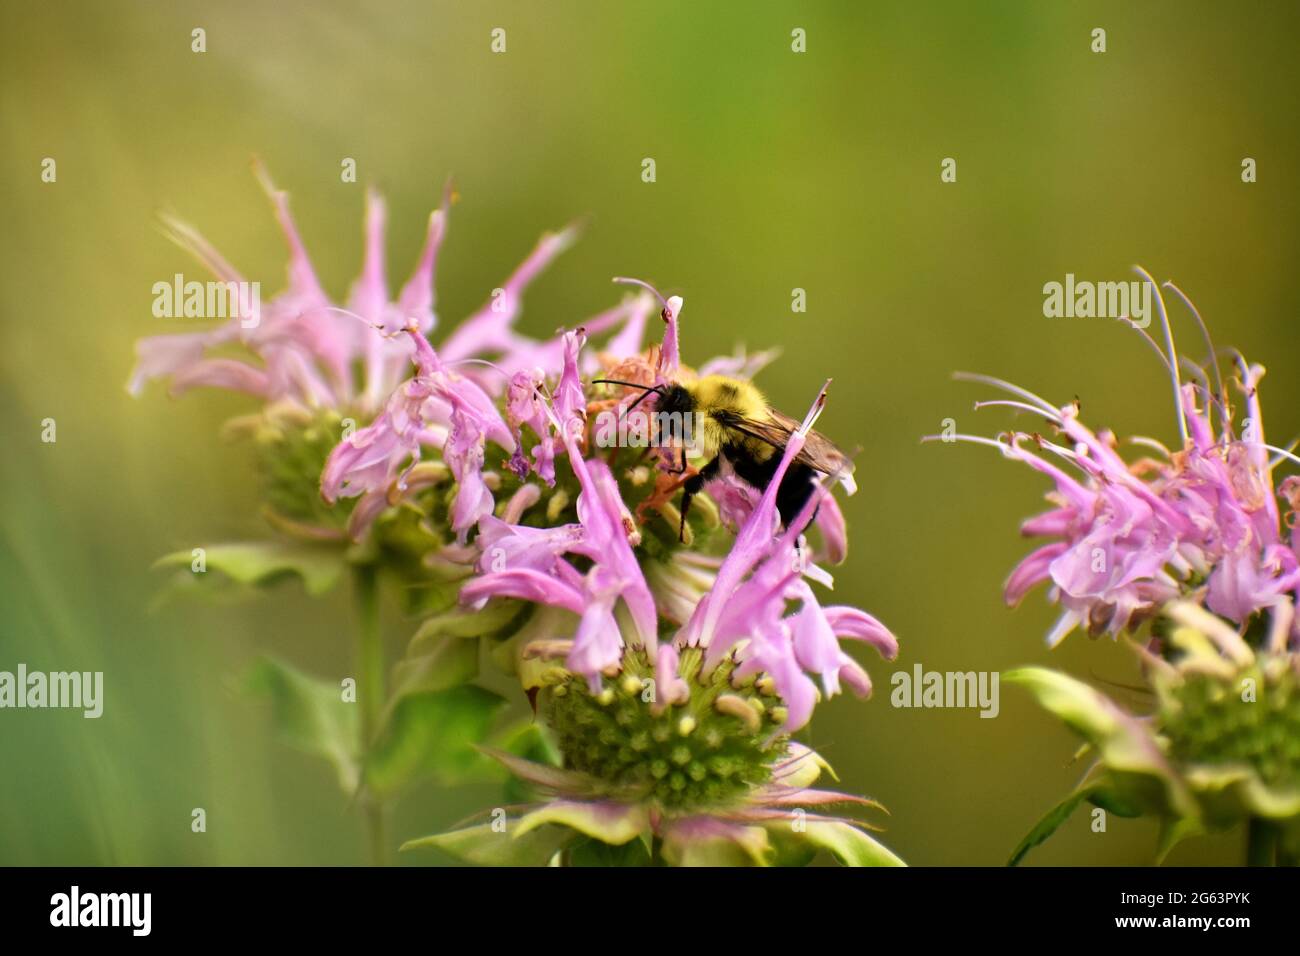 Bumblebee (Bombus sp) pollinating flowers of a bee balm plant (Monarda sp) with a blurred green and tan background. Stock Photo